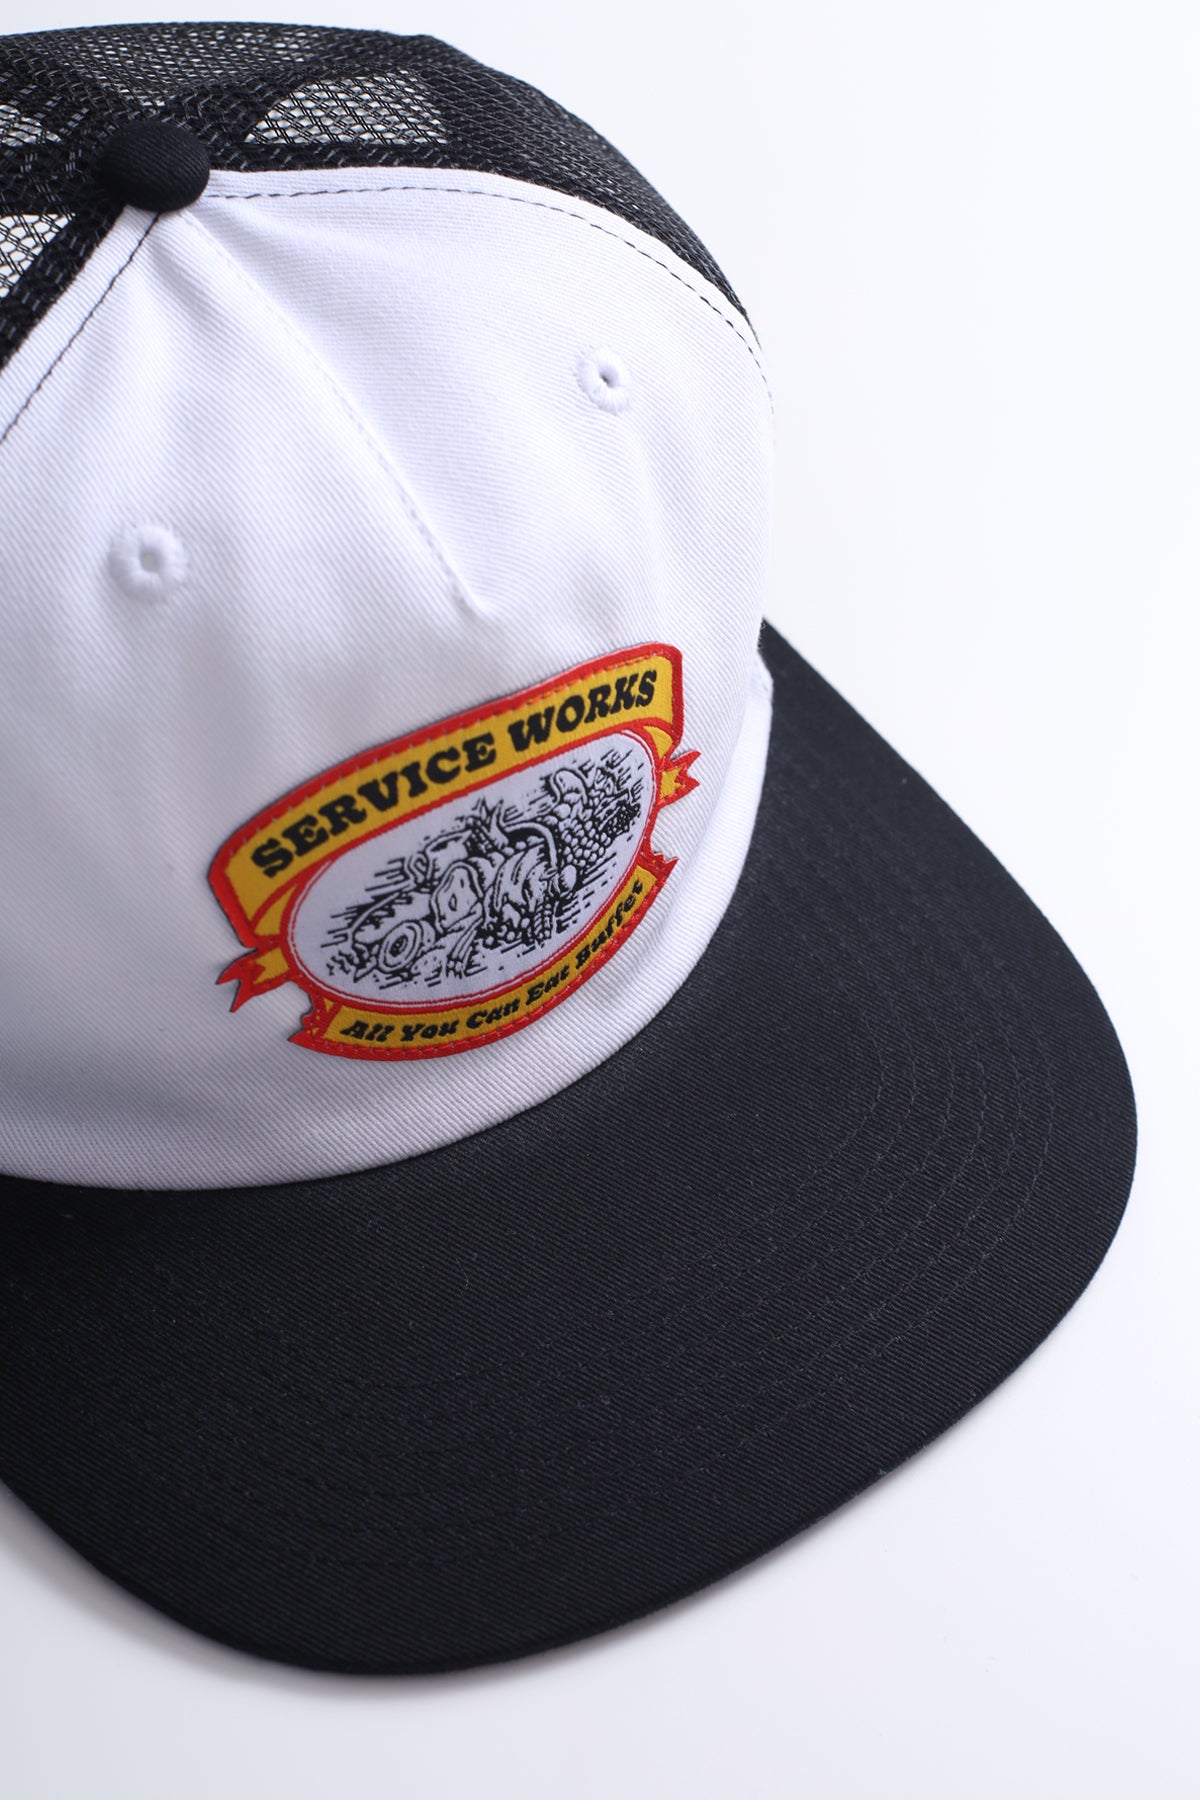 Service Works All You Can Eat Trucker Hat